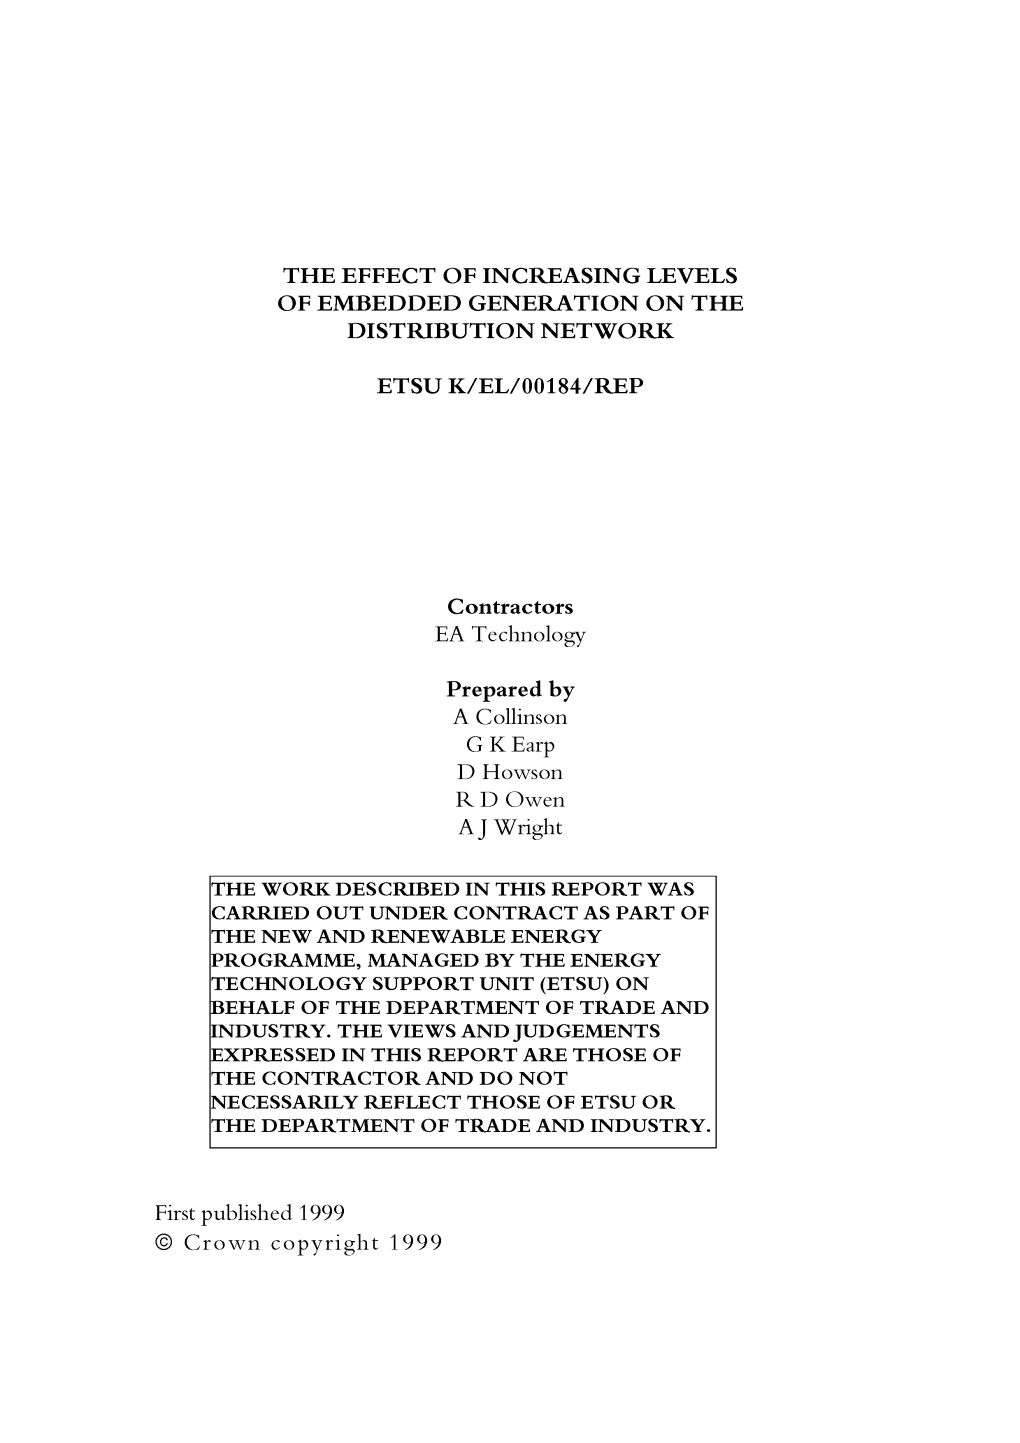 THE EFFECT of INCREASING LEVELS of EMBEDDED GENERATION on the DISTRIBUTION NETWORK ETSU K/EL/00184/REP Contractors Prepared By